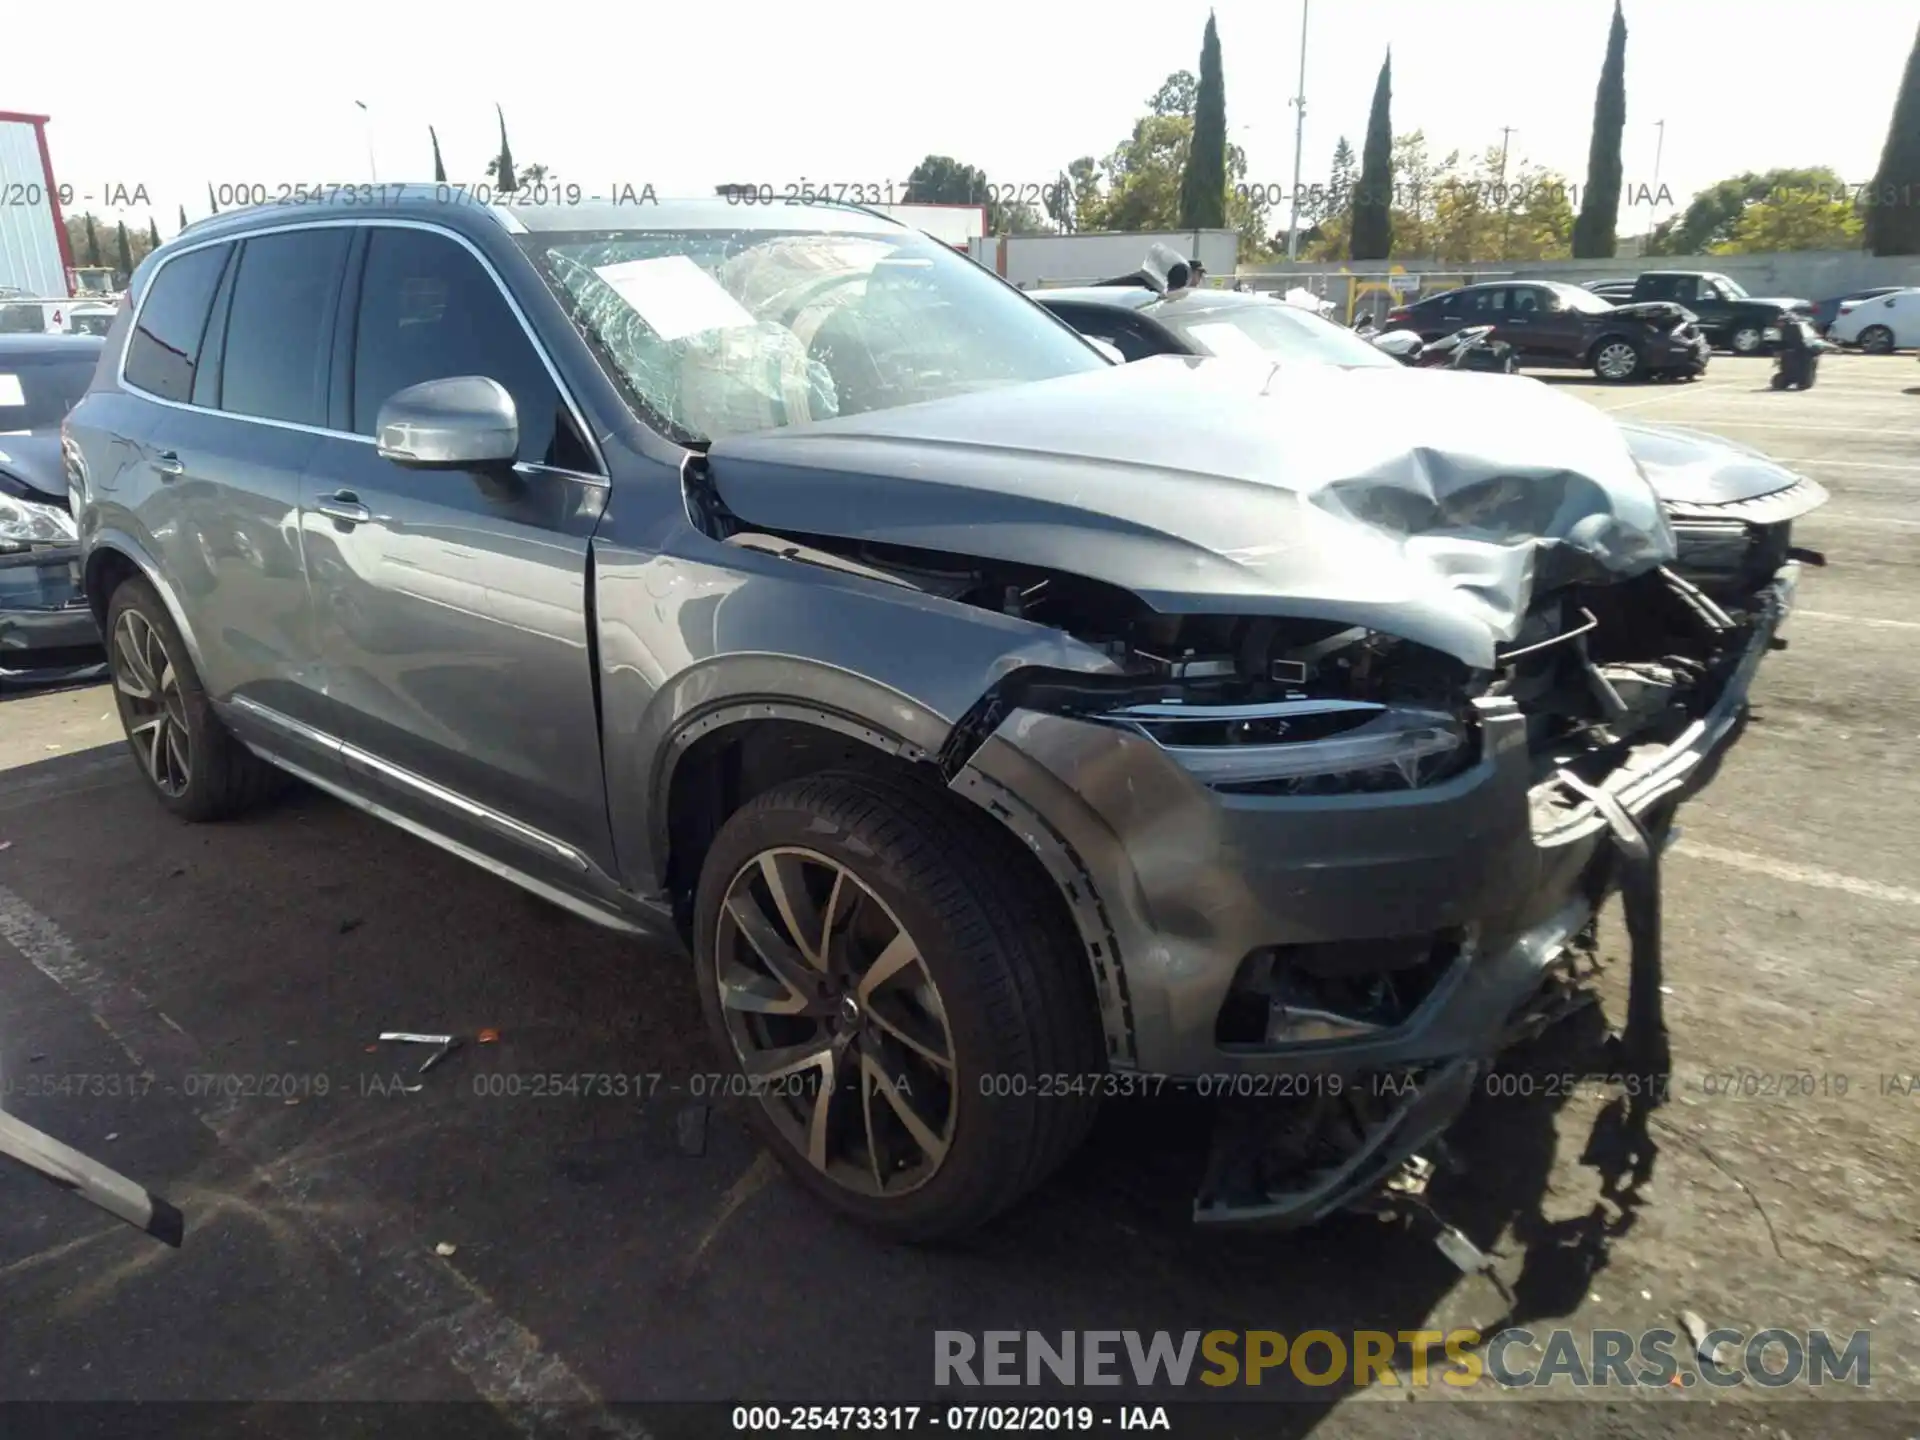 1 Photograph of a damaged car YV4A22PL0K1432897 VOLVO XC90 2019